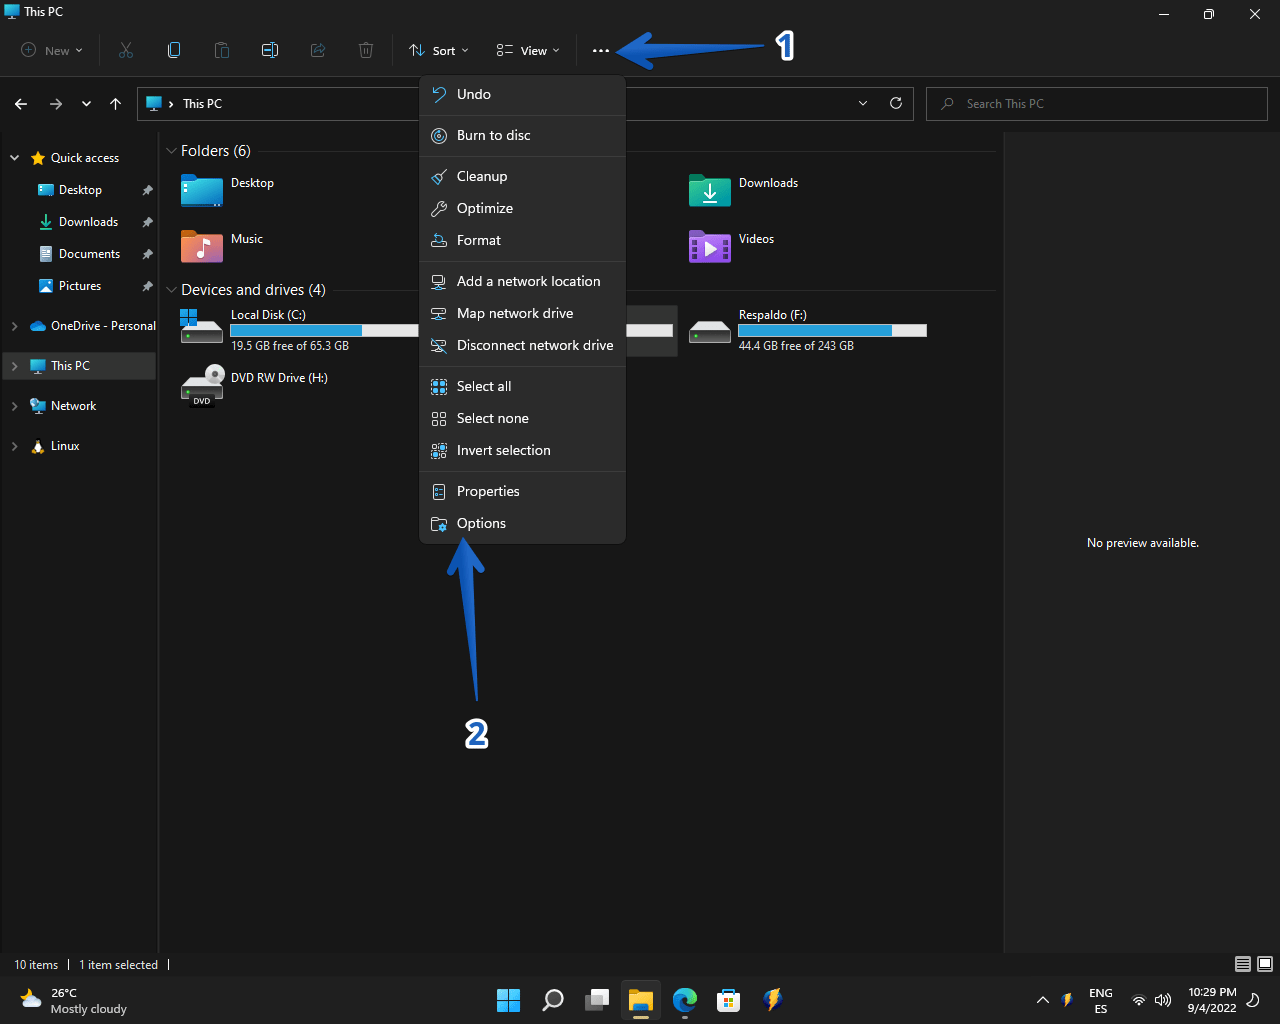 Disable ads in file explorer by going to the folder options